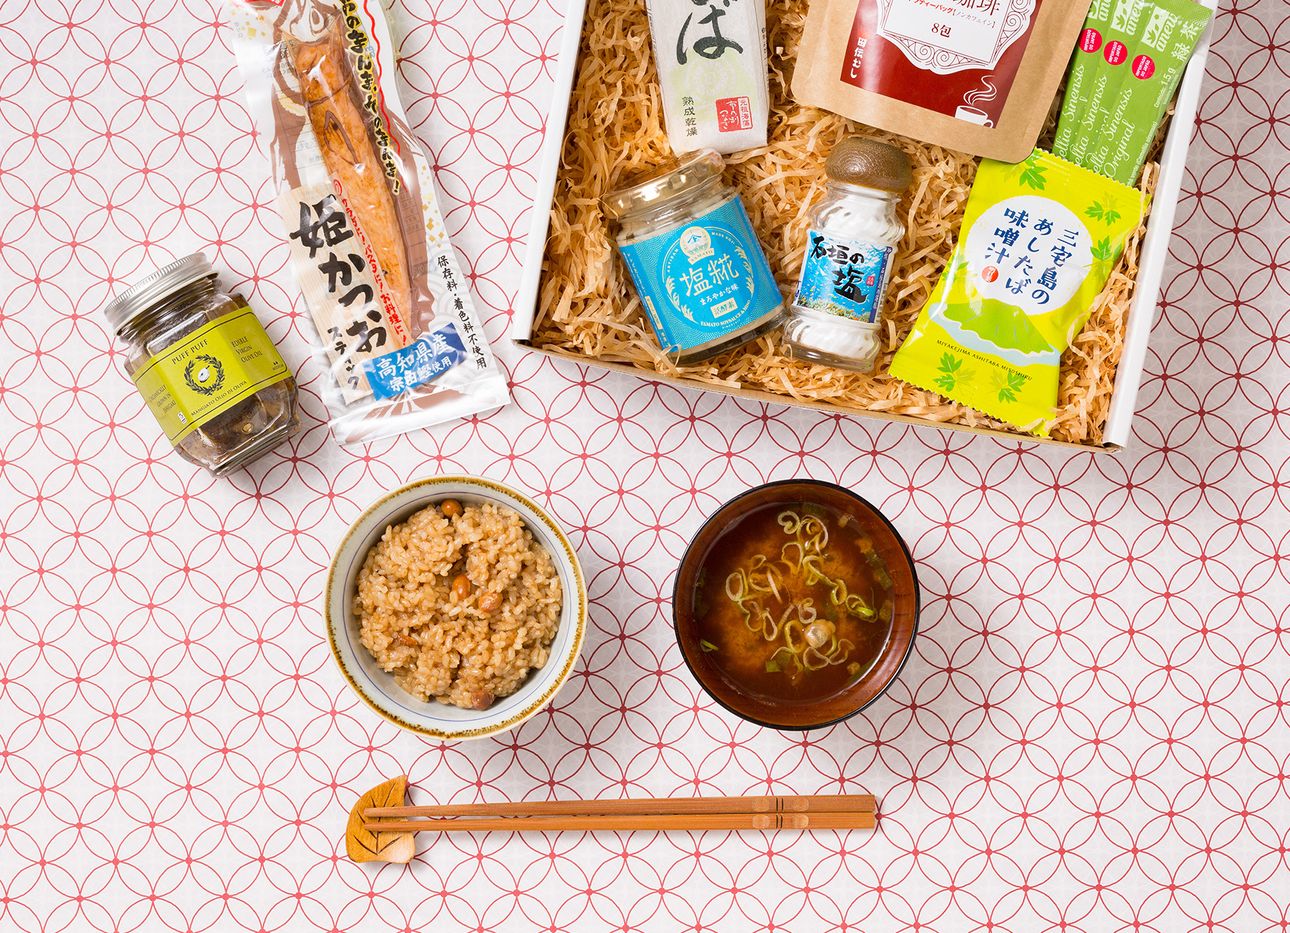 A Kokoro Care Package open to show its contents on a patterned white and red background.